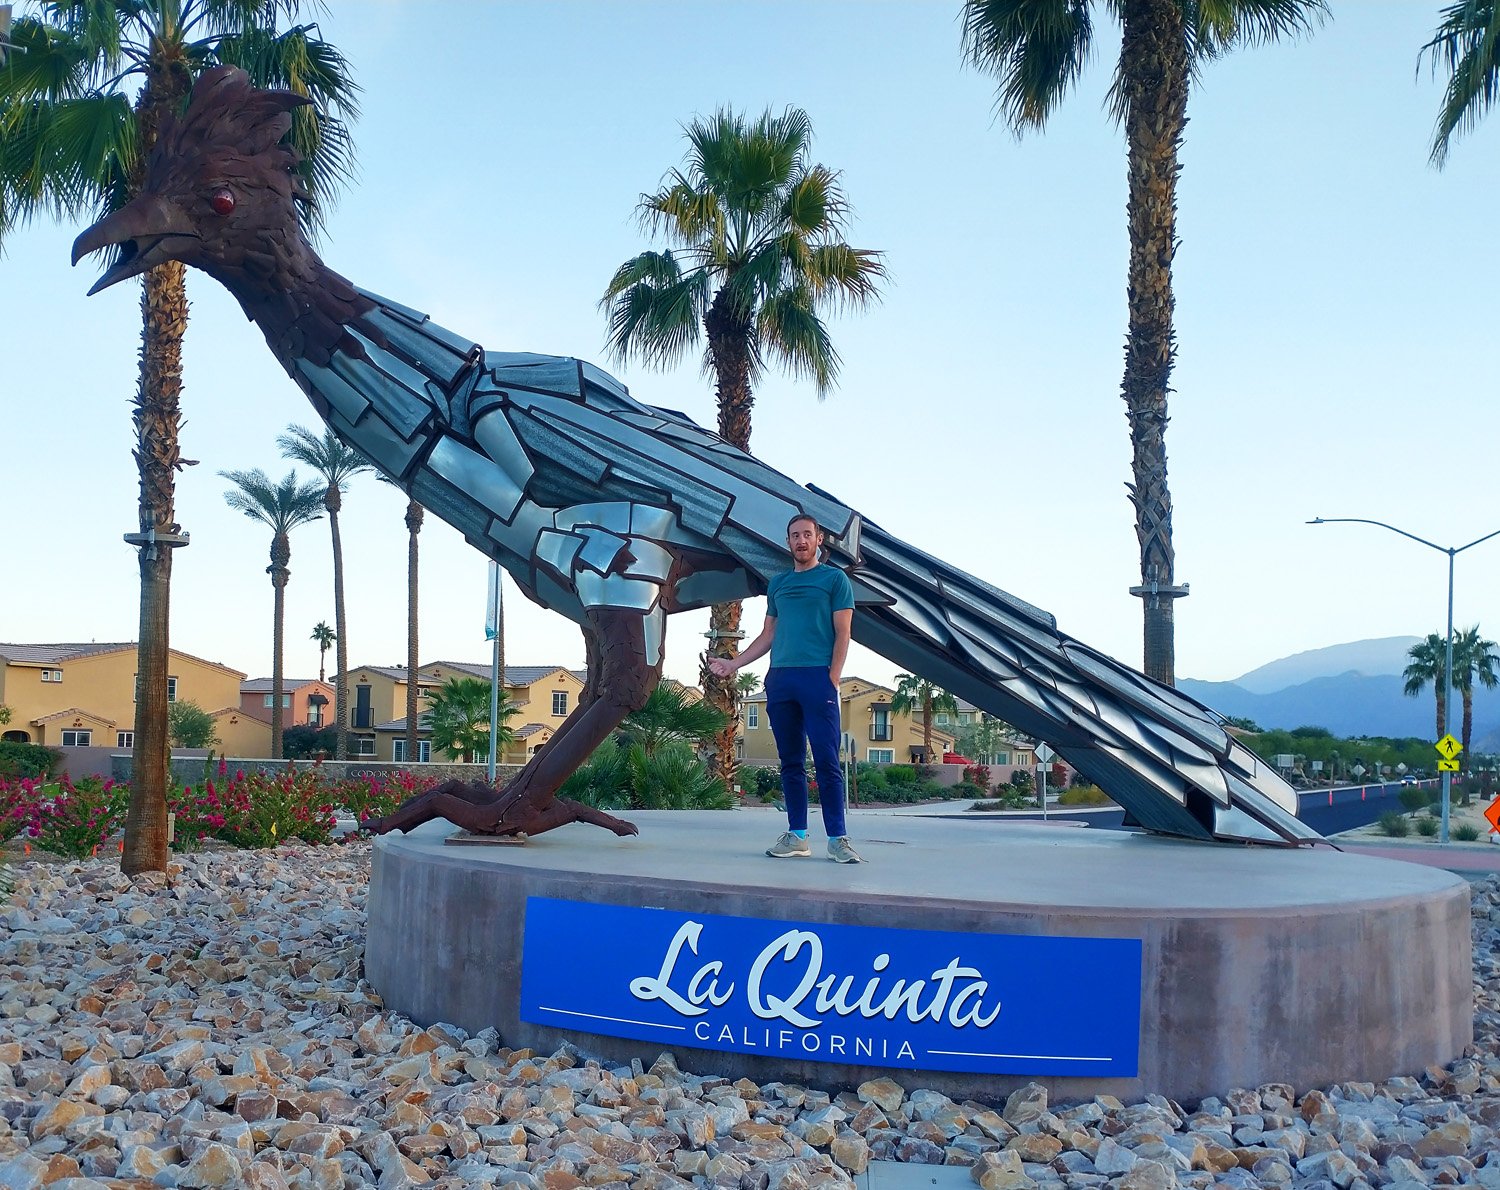 Rushed to make it to La Quinta in time before sunset, for this badass statue of a huge Road Runner. One of the best roadside statues for sure.